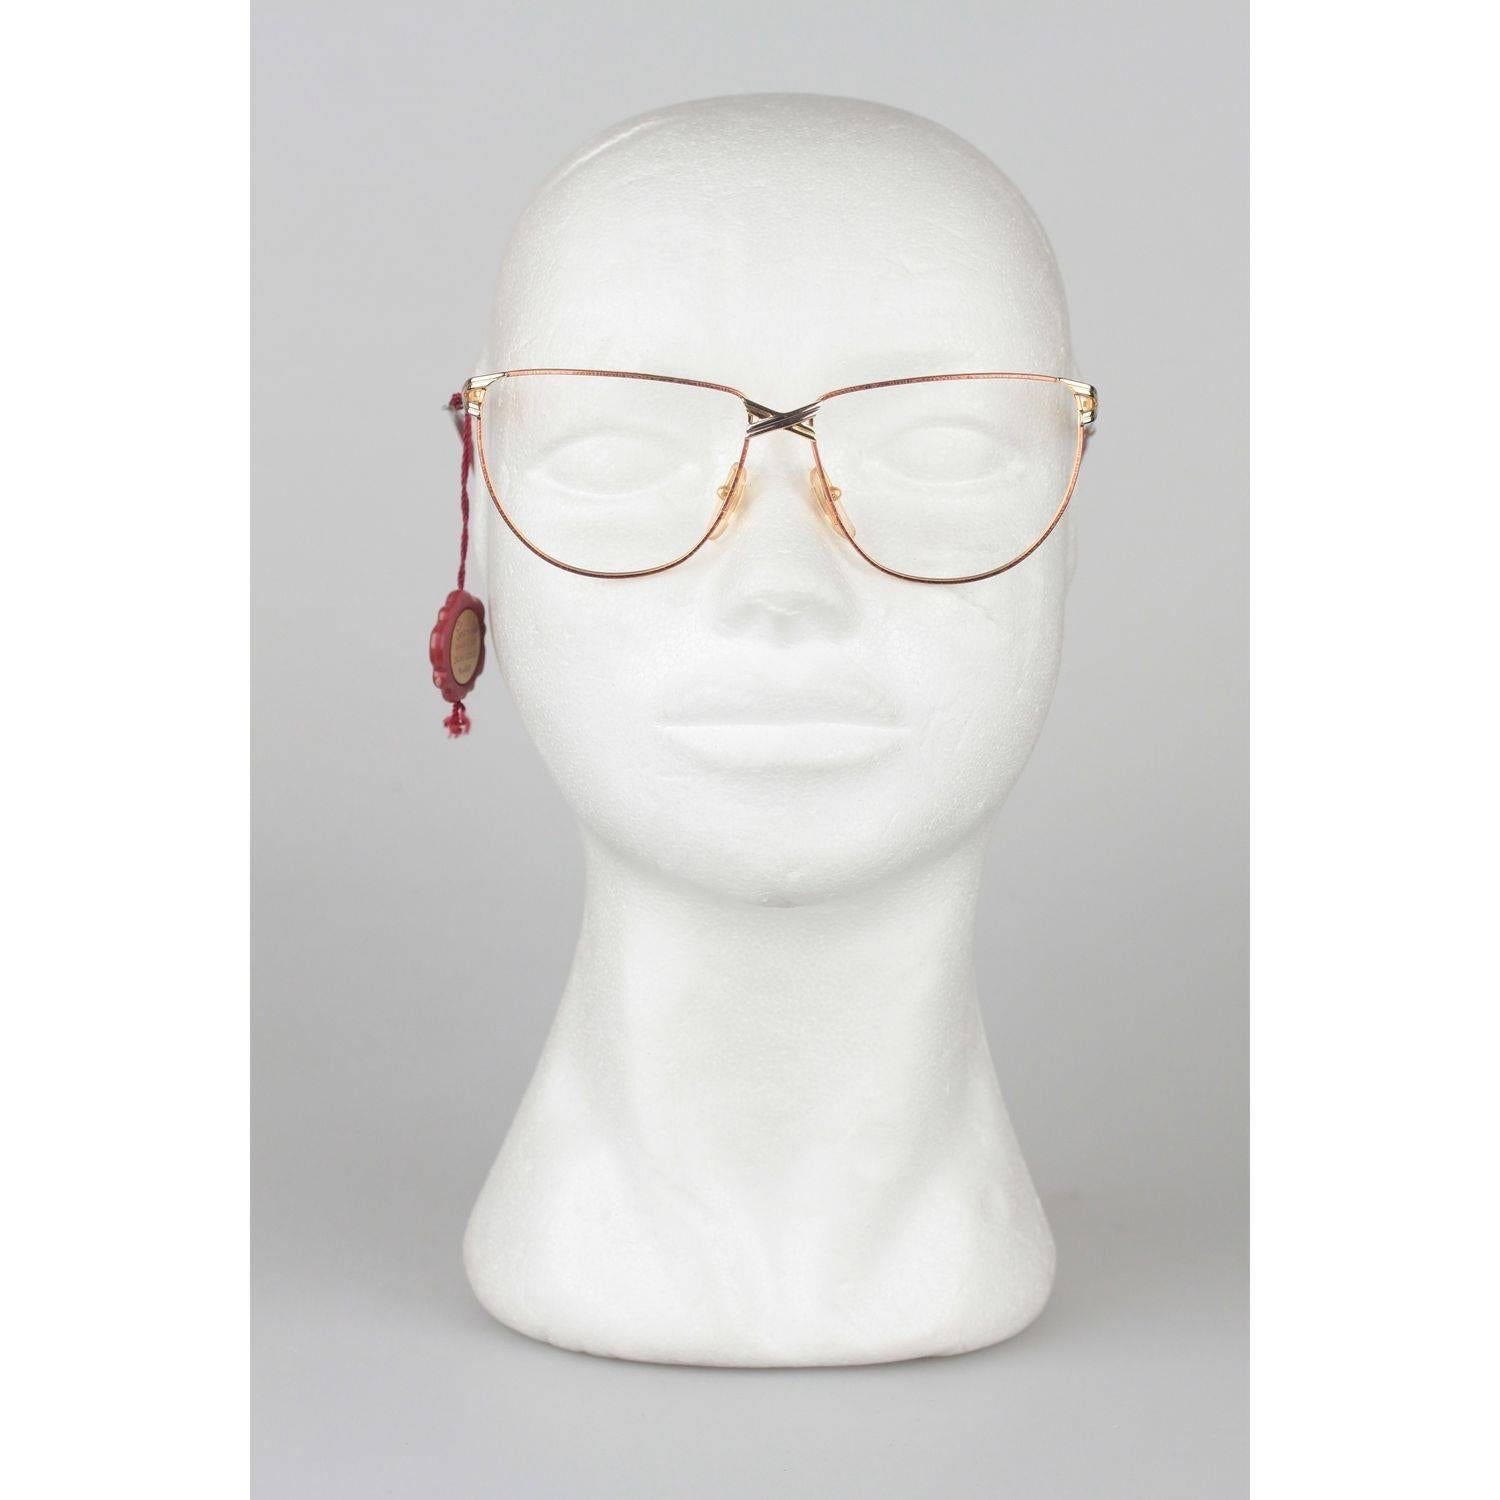 - Glamorous Casanova eyeglasses from mid-80s
- Rare, extravagant & sumptuous (24Kt gold-plated)
- A true rarity and highlight for every collector
- No lenses 
- Style & Mod.: CN 4 C 01 54/18
Measurements:
- TEMPLE MAX. LENGTH: 133 mm
- TEMPLE TO